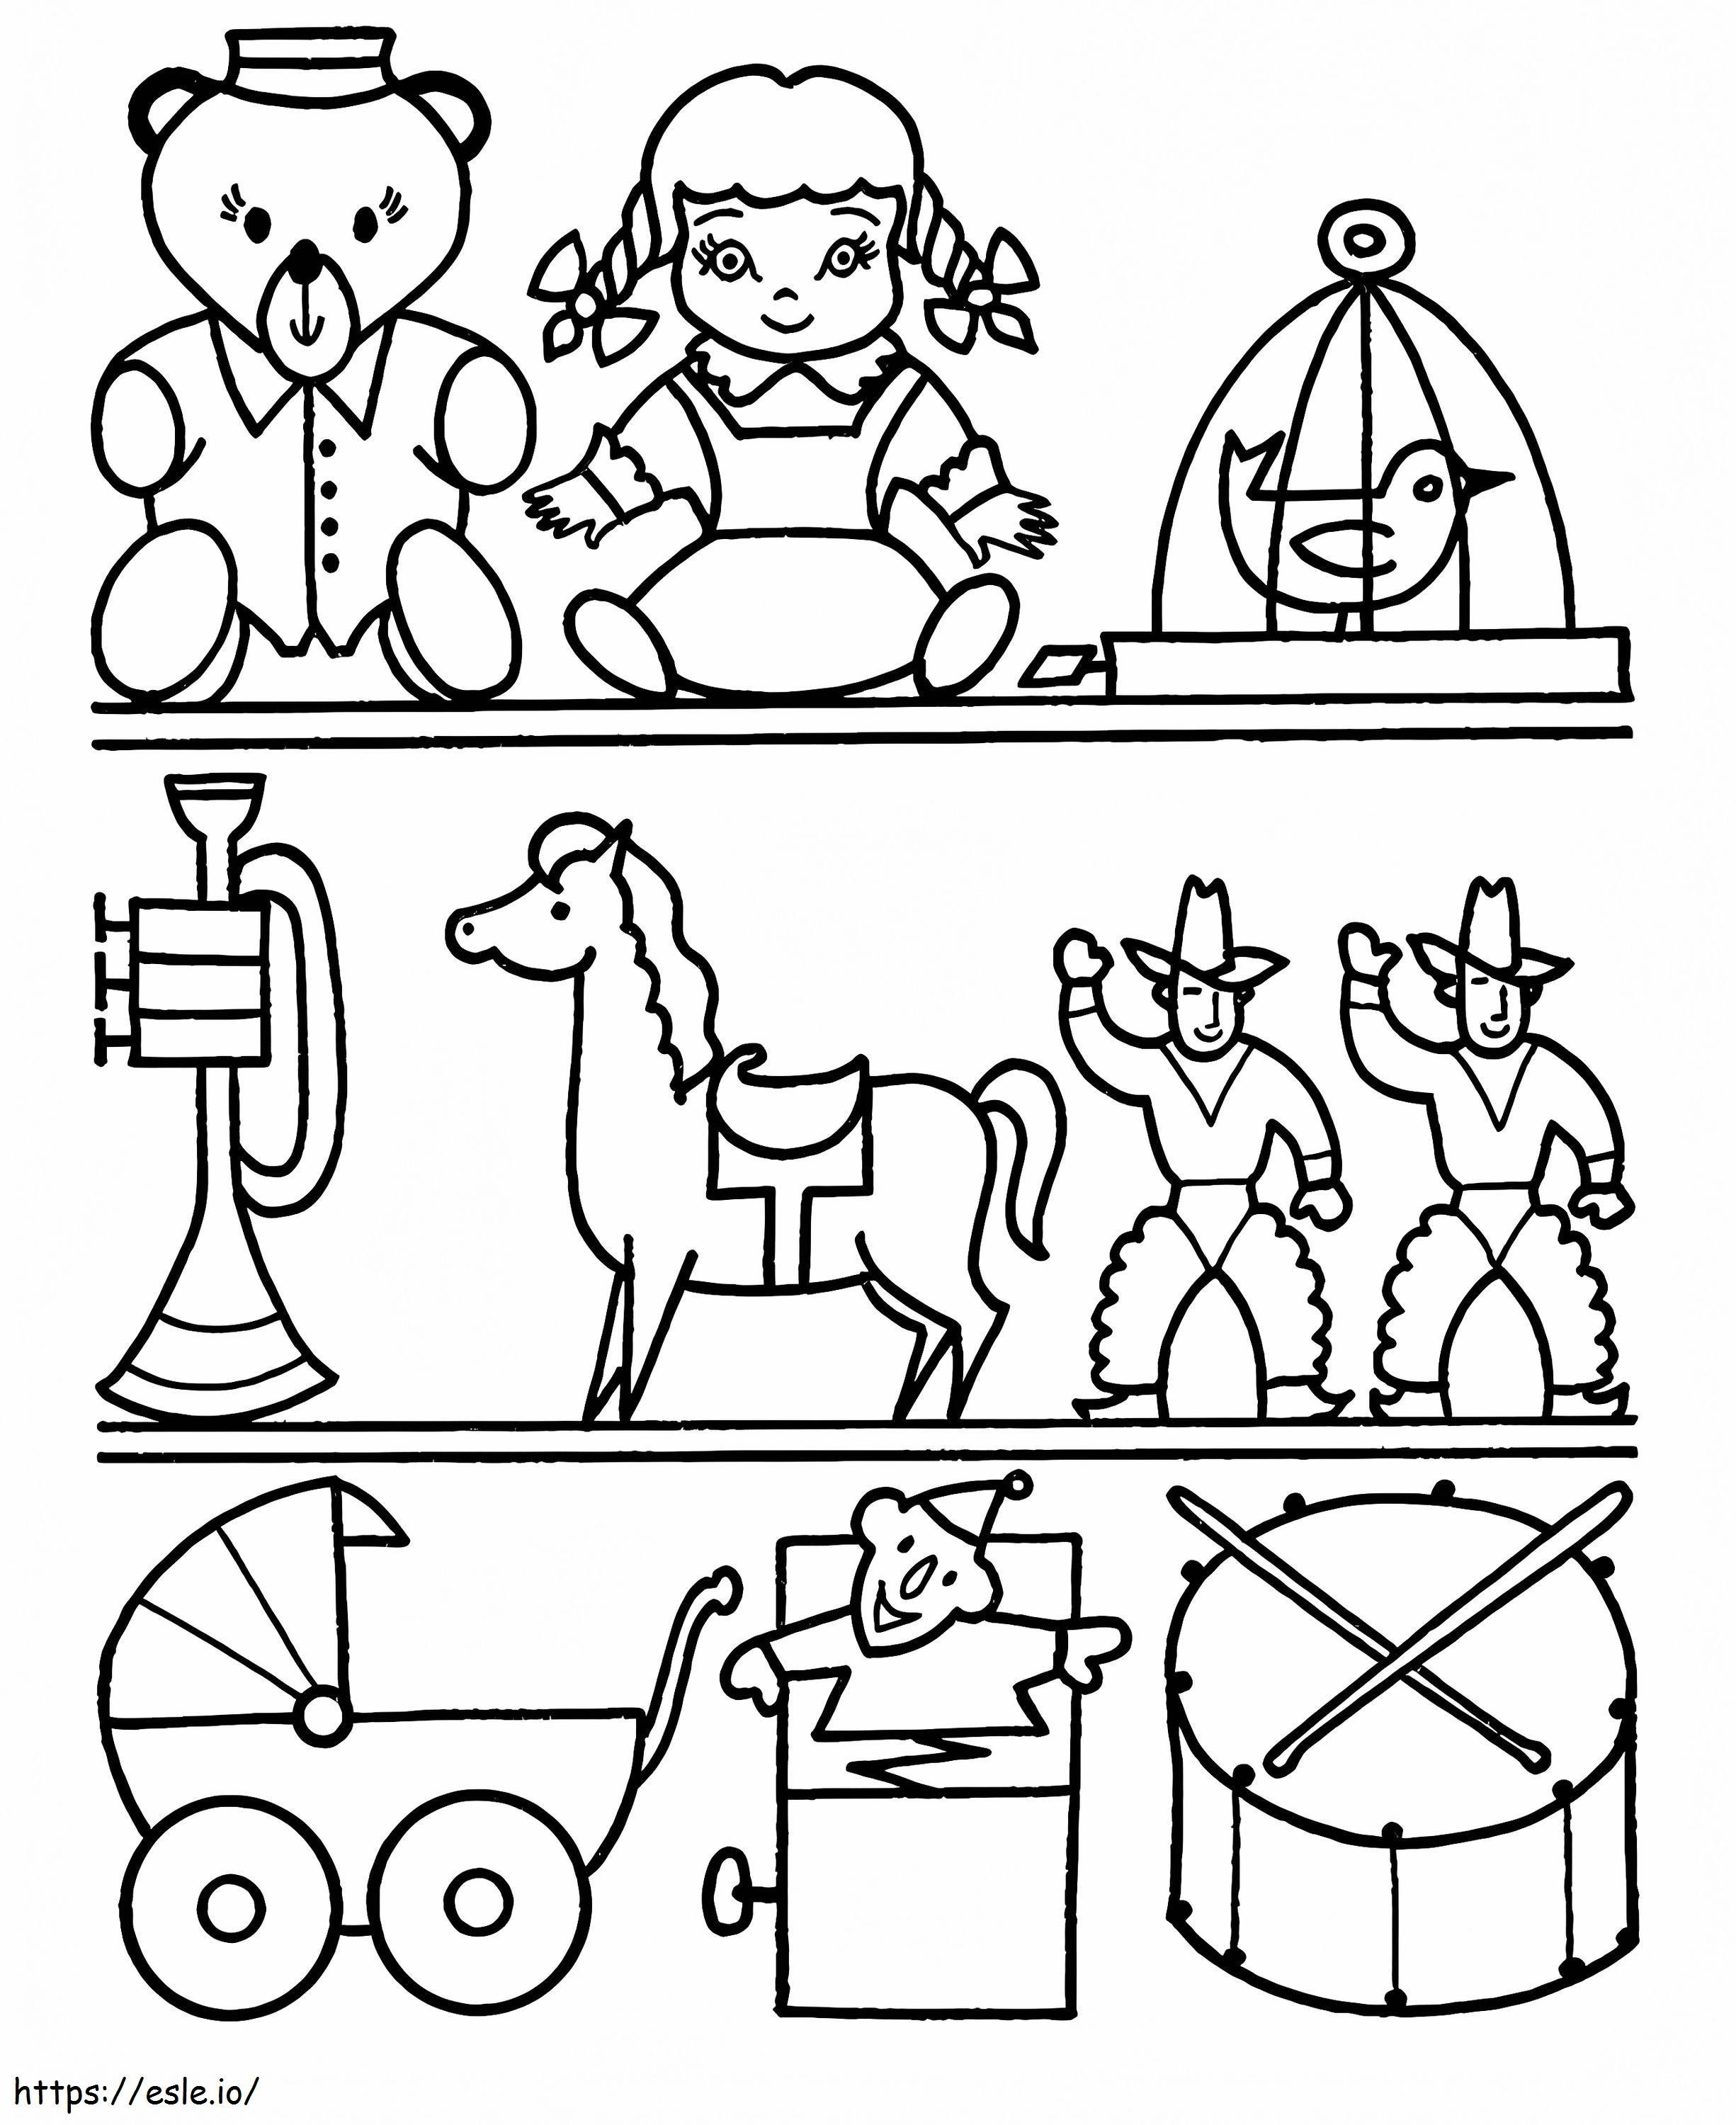 Toys On The Shelves coloring page